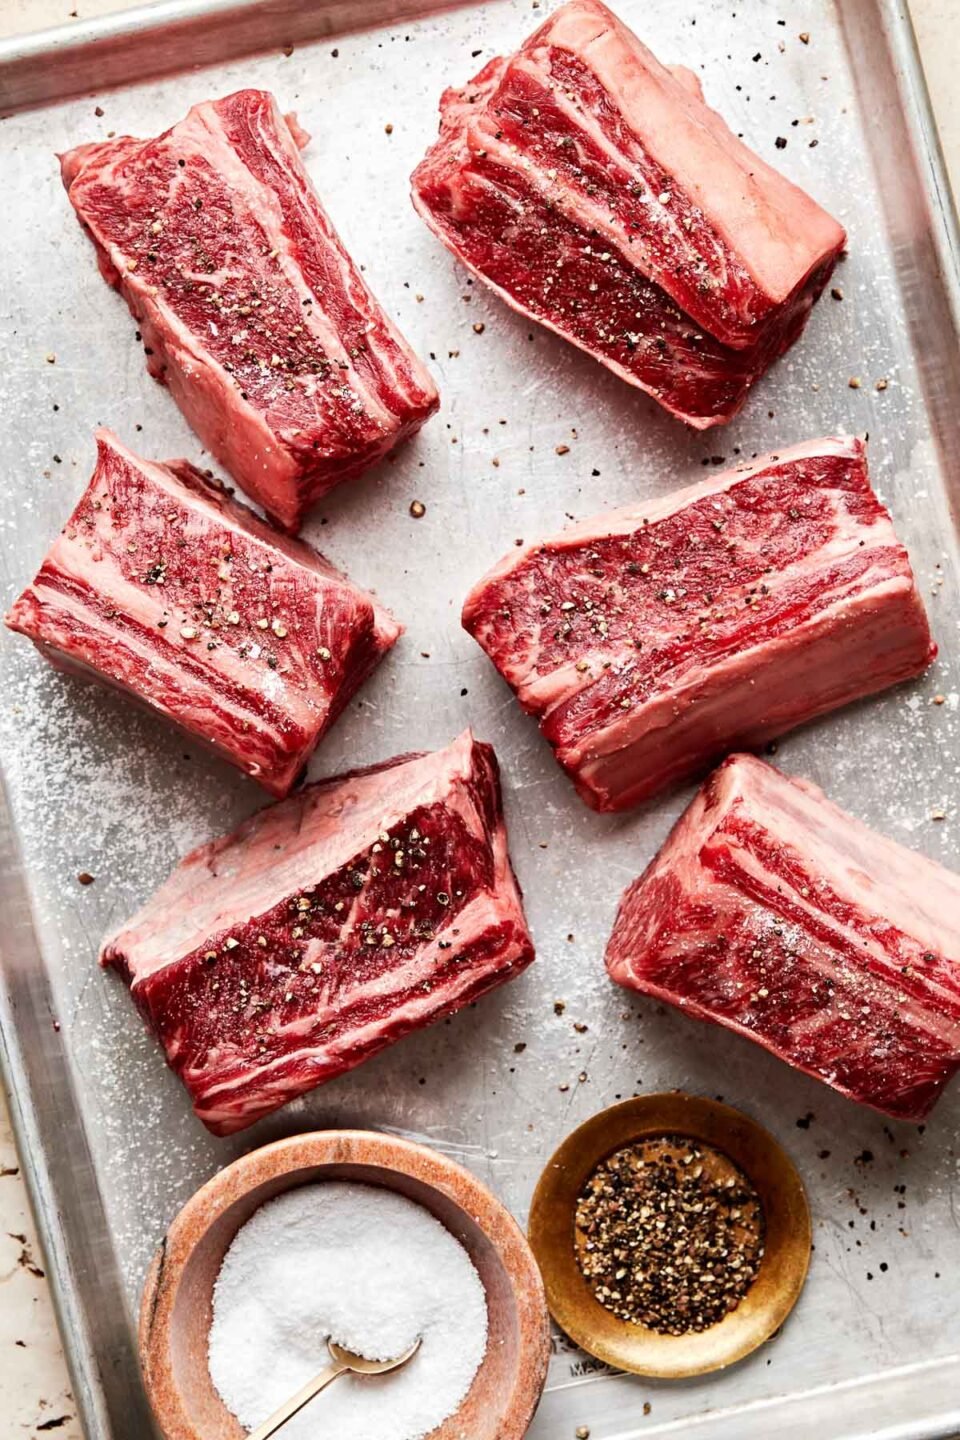 An overhead shot of six English-cut beef short ribs, generously seasoned with salt and pepper, alongside small bowls of salt and pepper on a sheet pan atop an off-white surface.